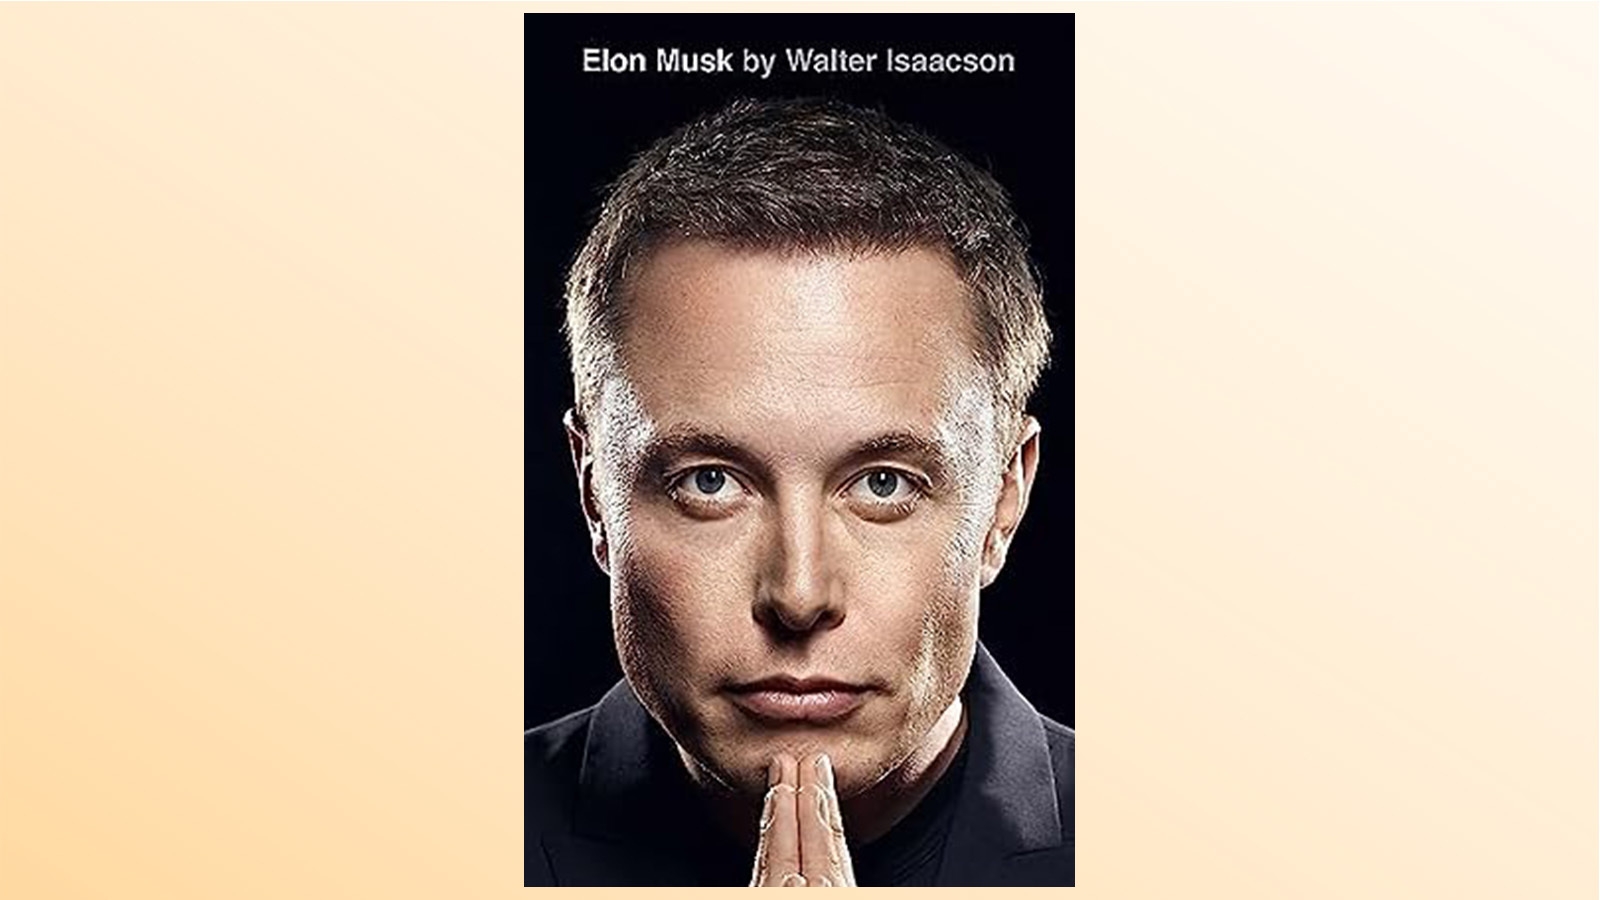 An image of the cover of 'Elon Musk,' one of the Best Books of 2023 according to Amazon's book editors.